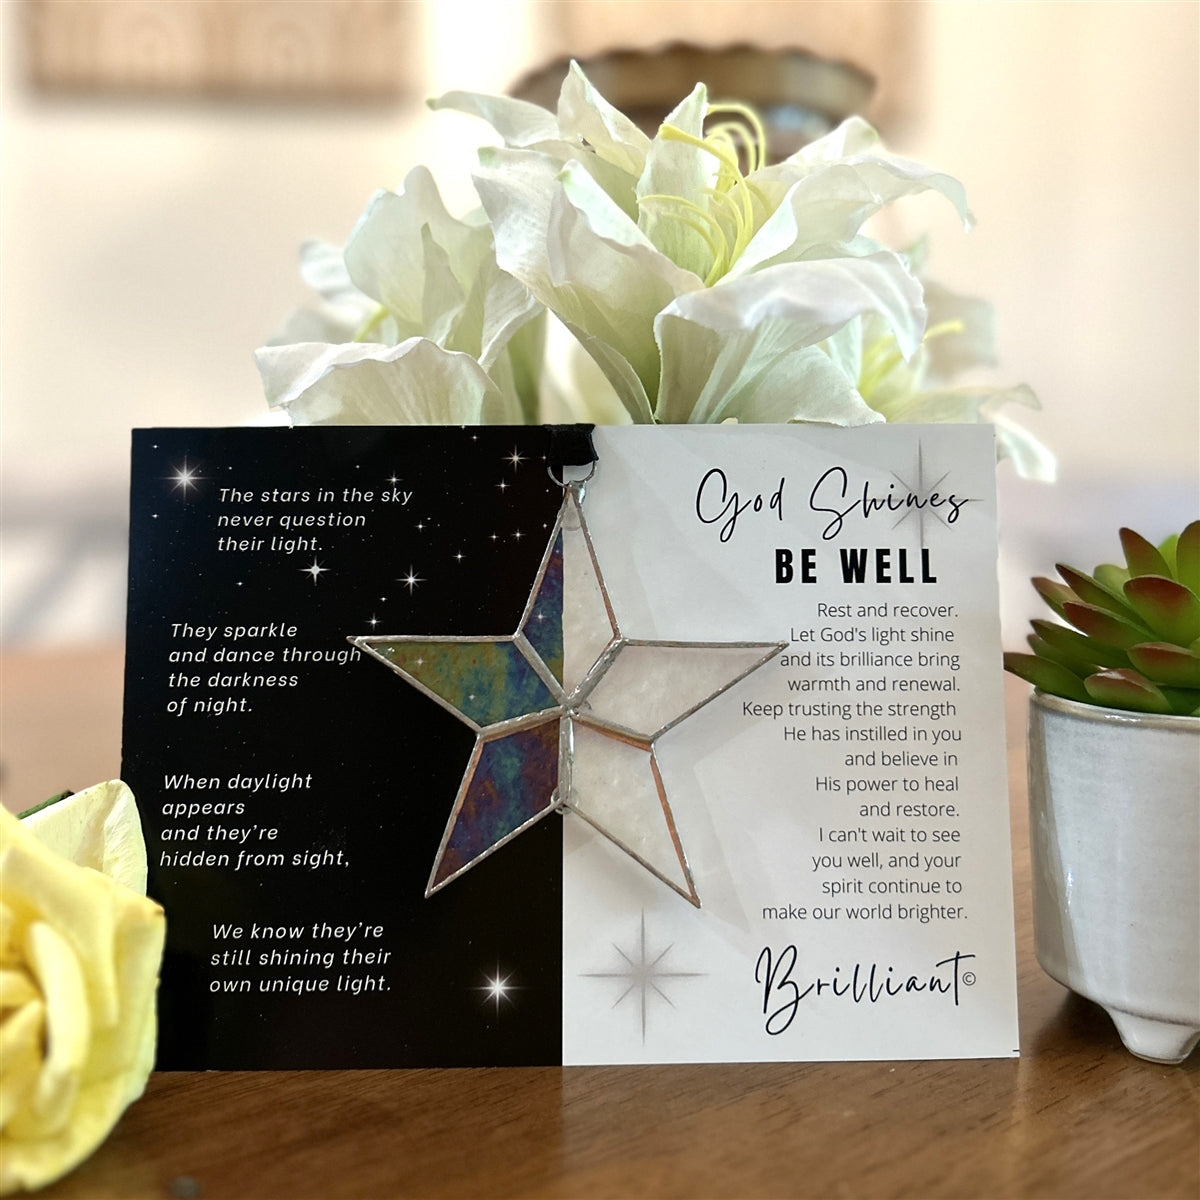 Be Well star and sentiment in a living room setting.